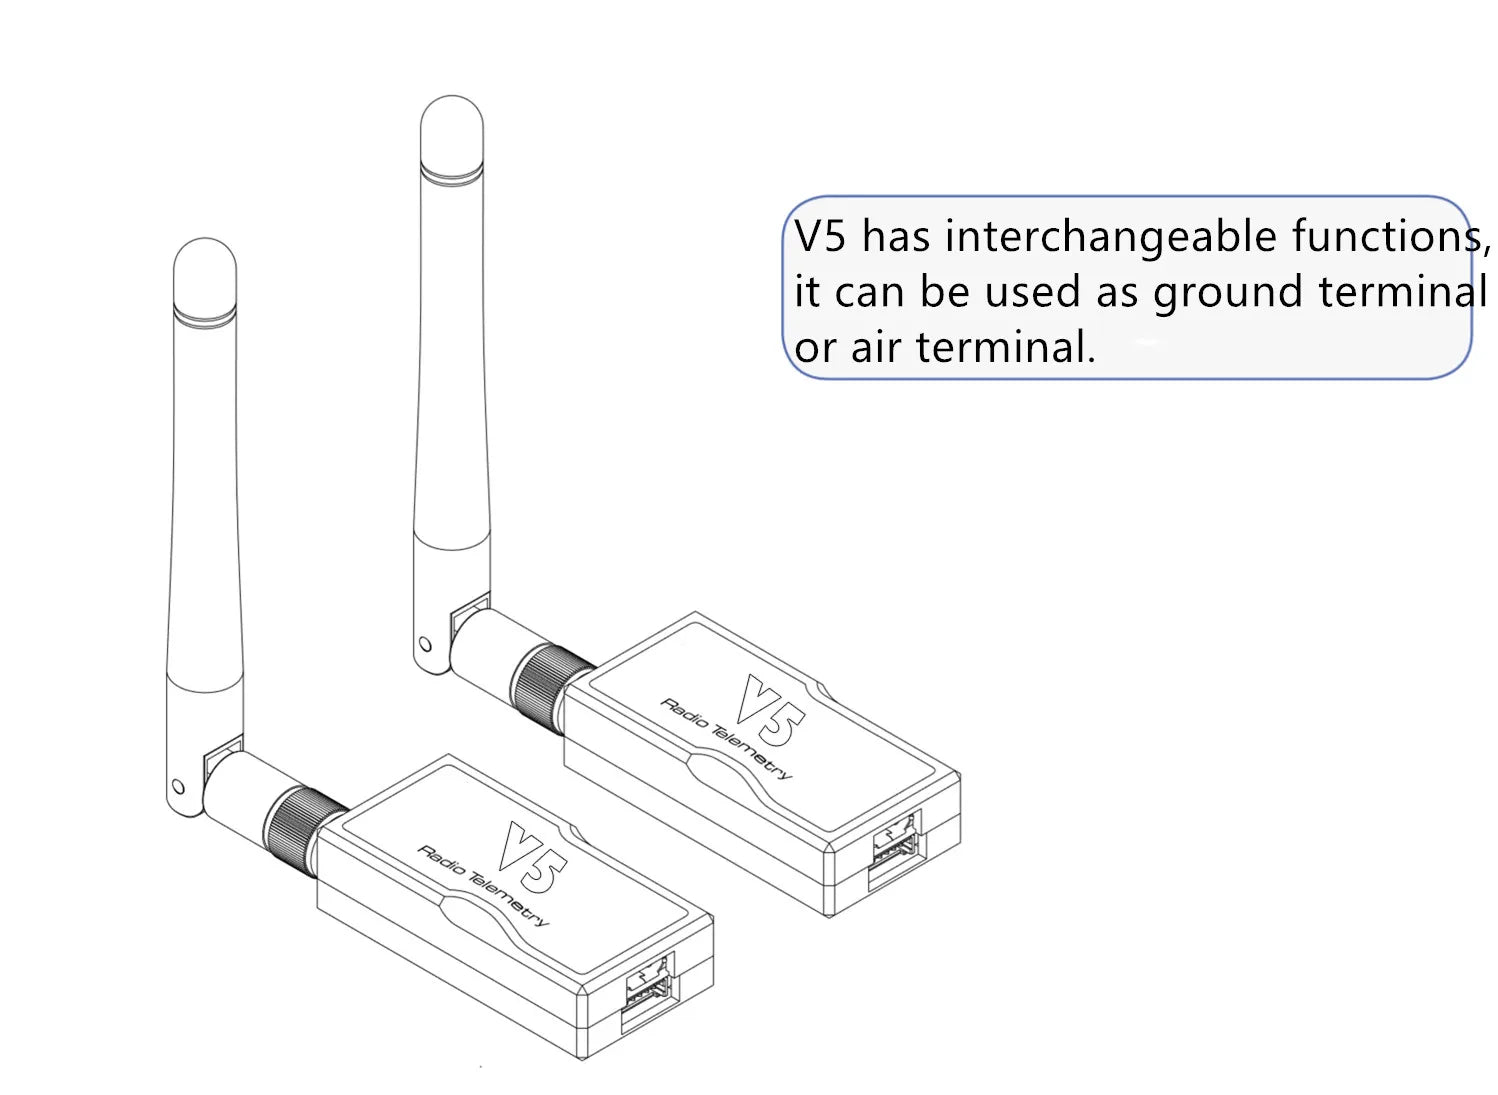 V5 has interchangeable functions, it can be used as ground terminal or air terminal .